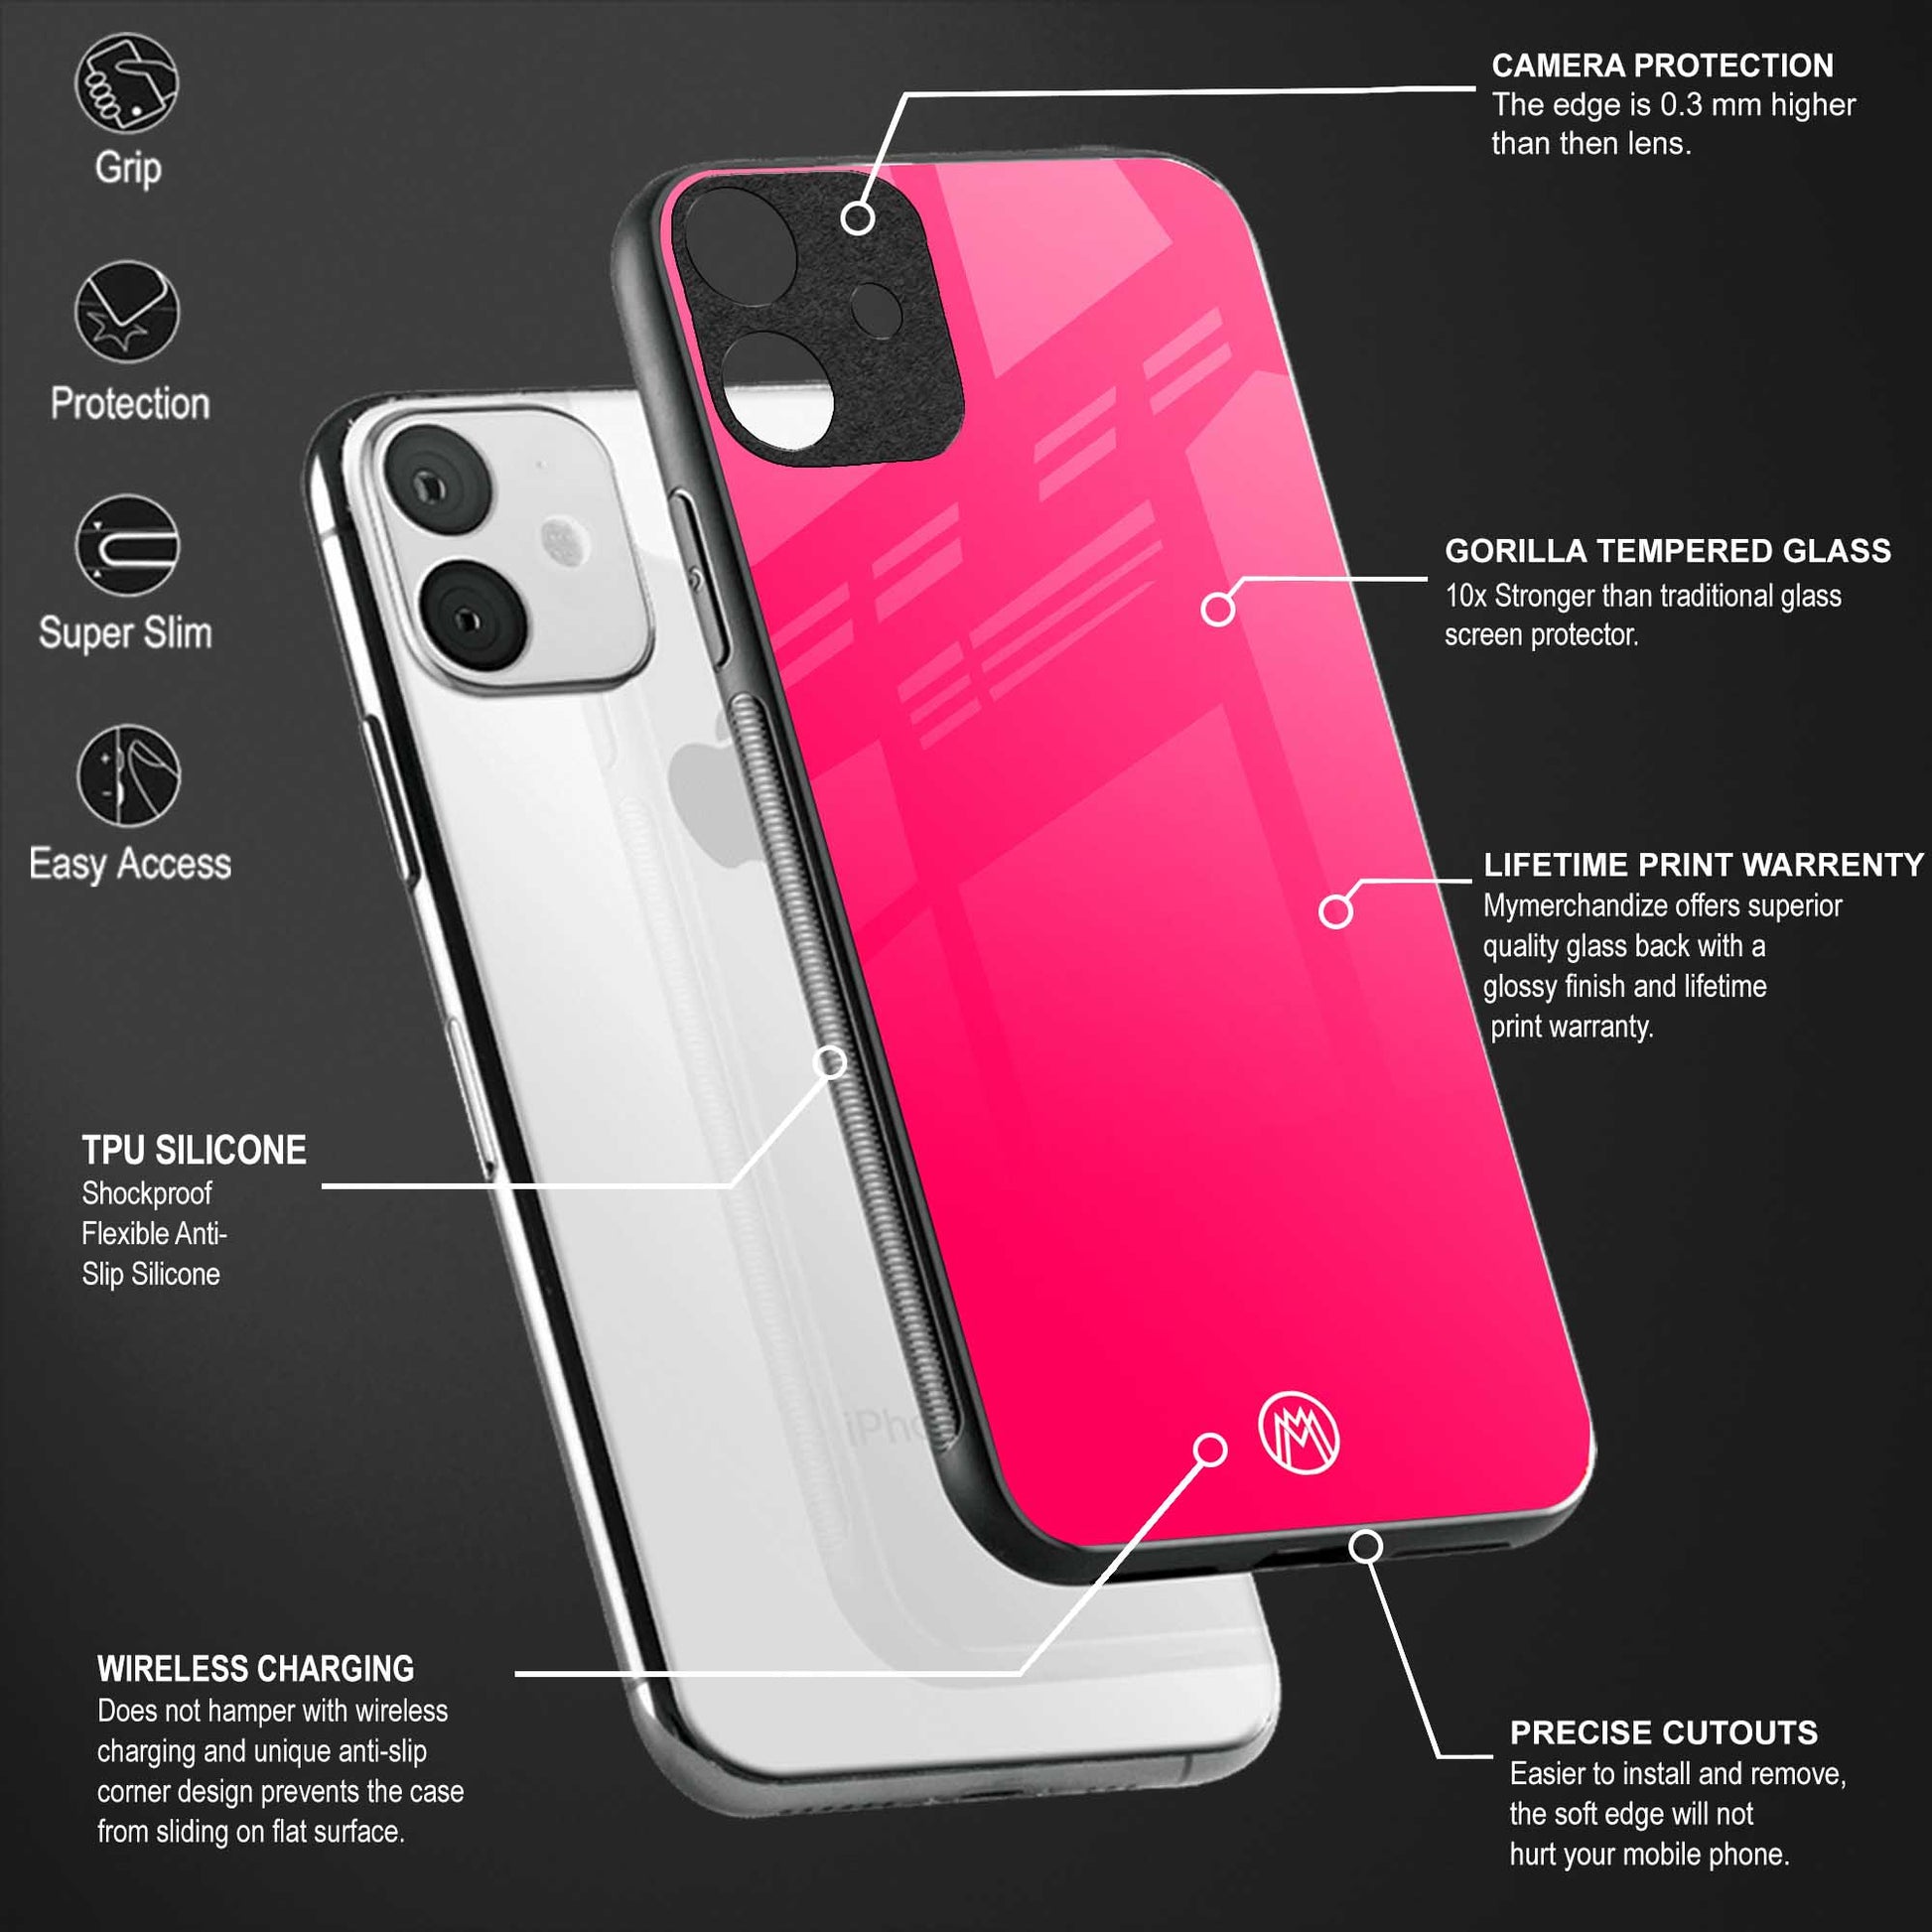 magenta paradise back phone cover | glass case for vivo y73